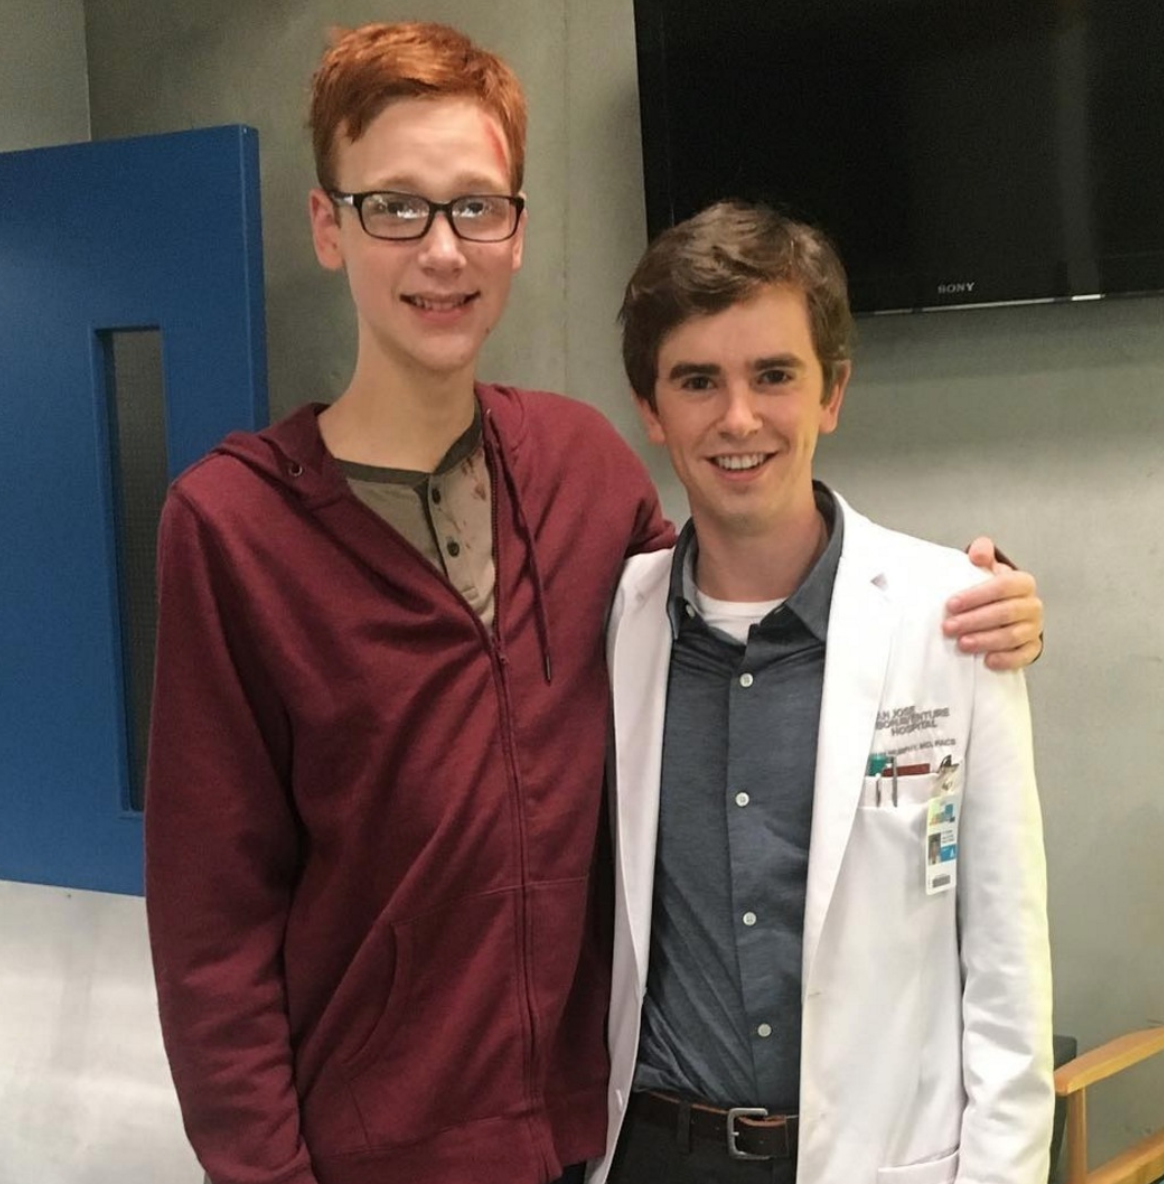 the good doctor actor with autism talks about dream role